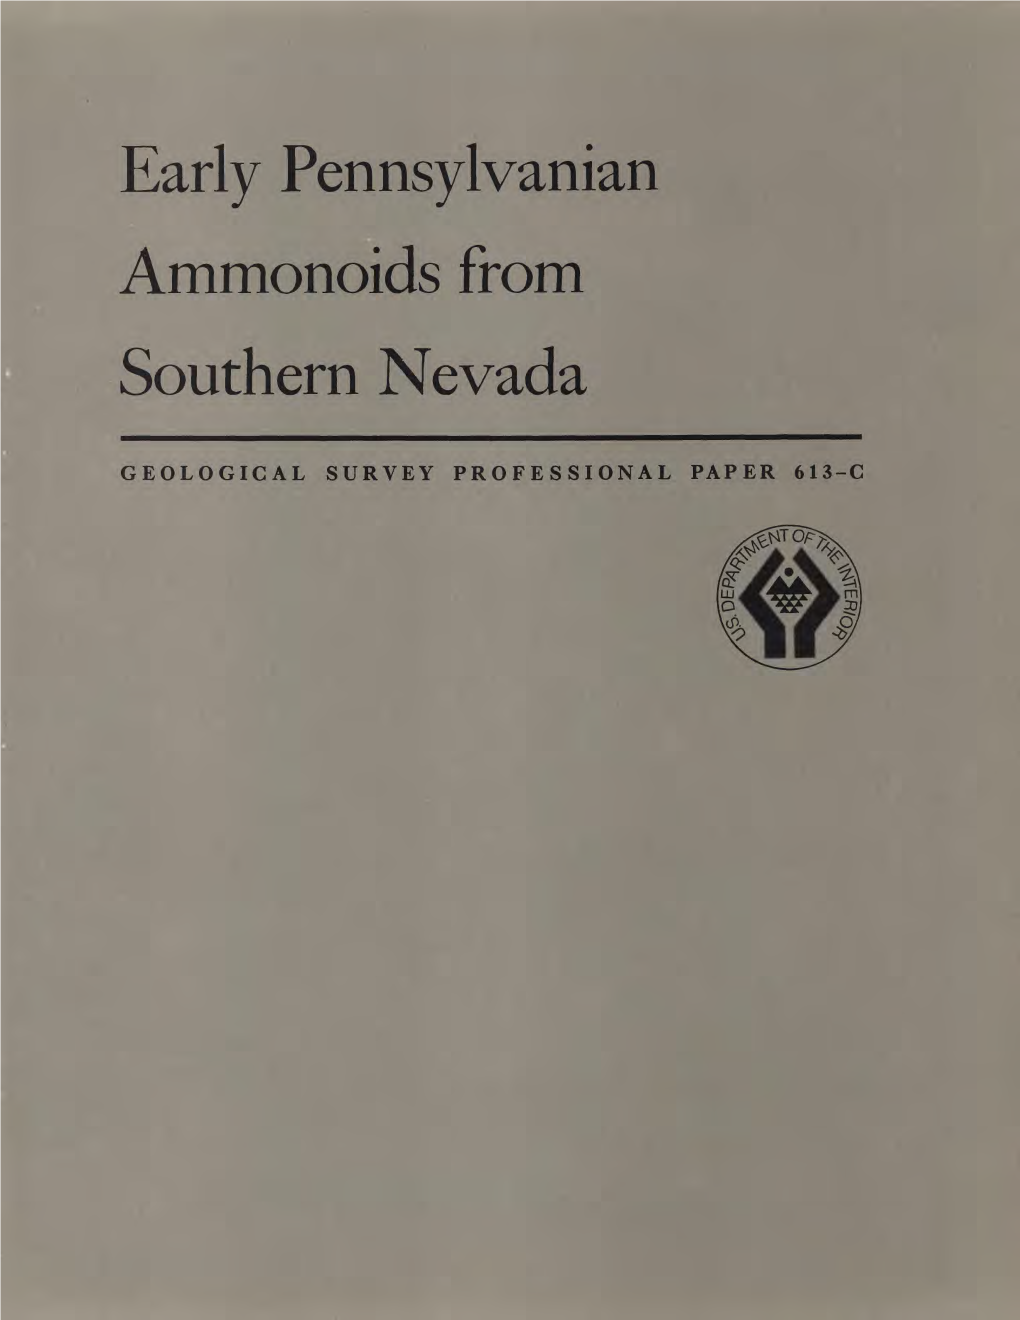 Early Pennsylvanian Ammonoids from Southern Nevada